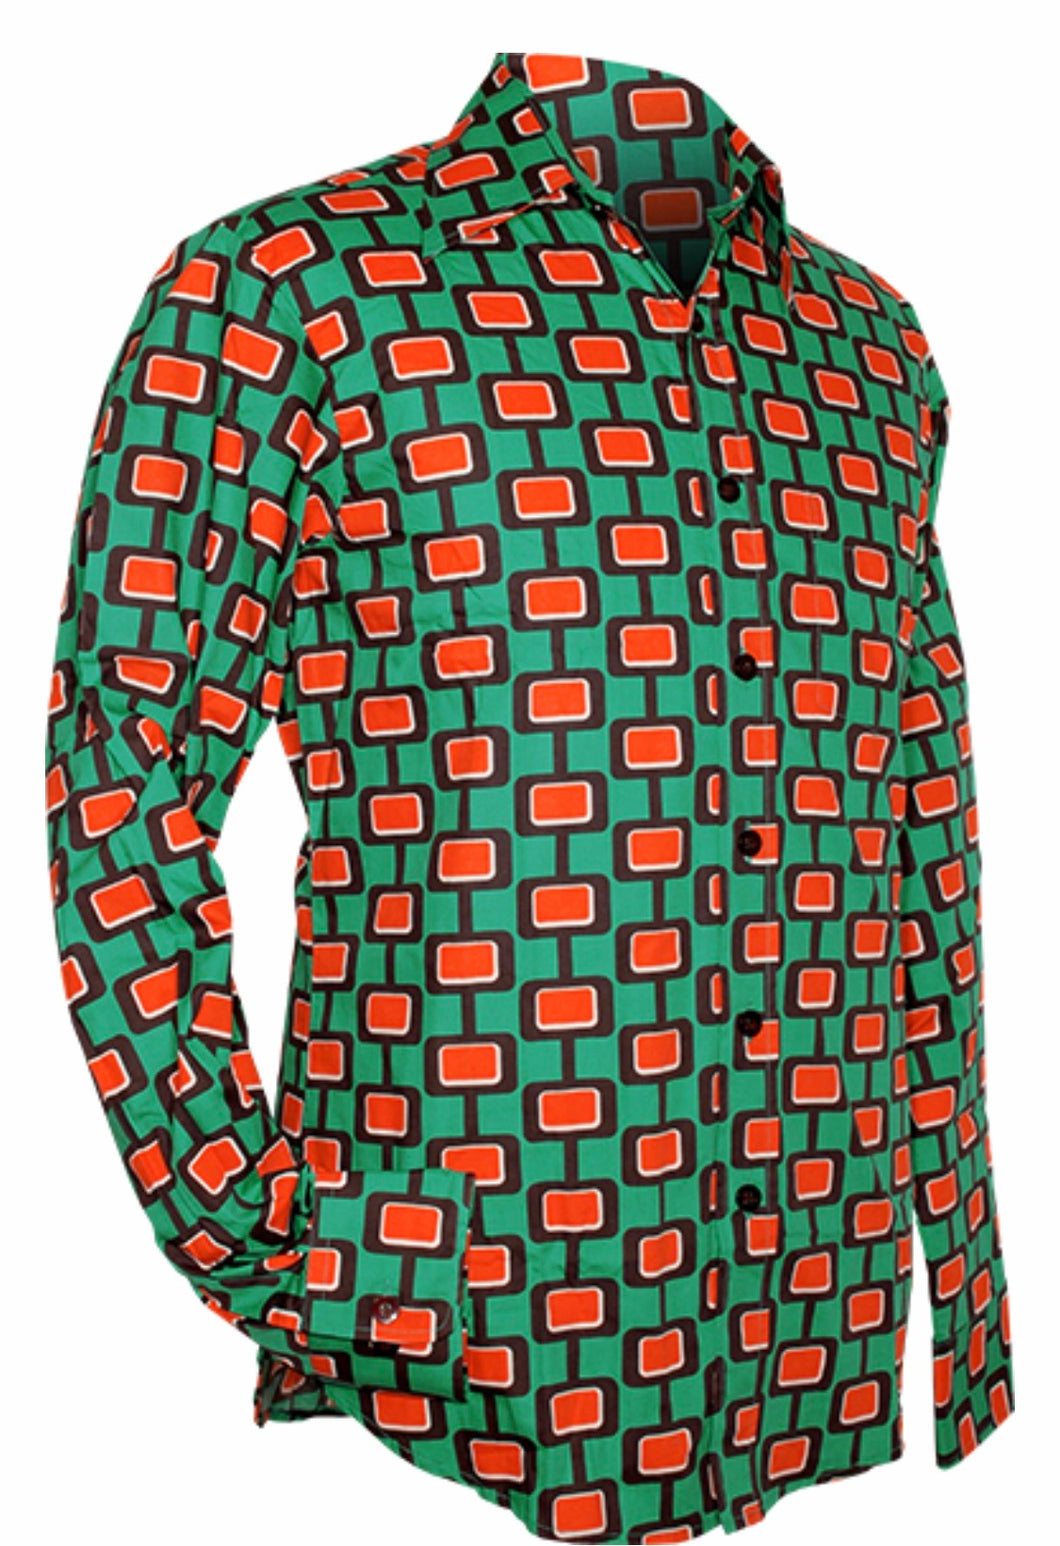 Screens design long sleeved Retro 70s style shirt in Turquoise